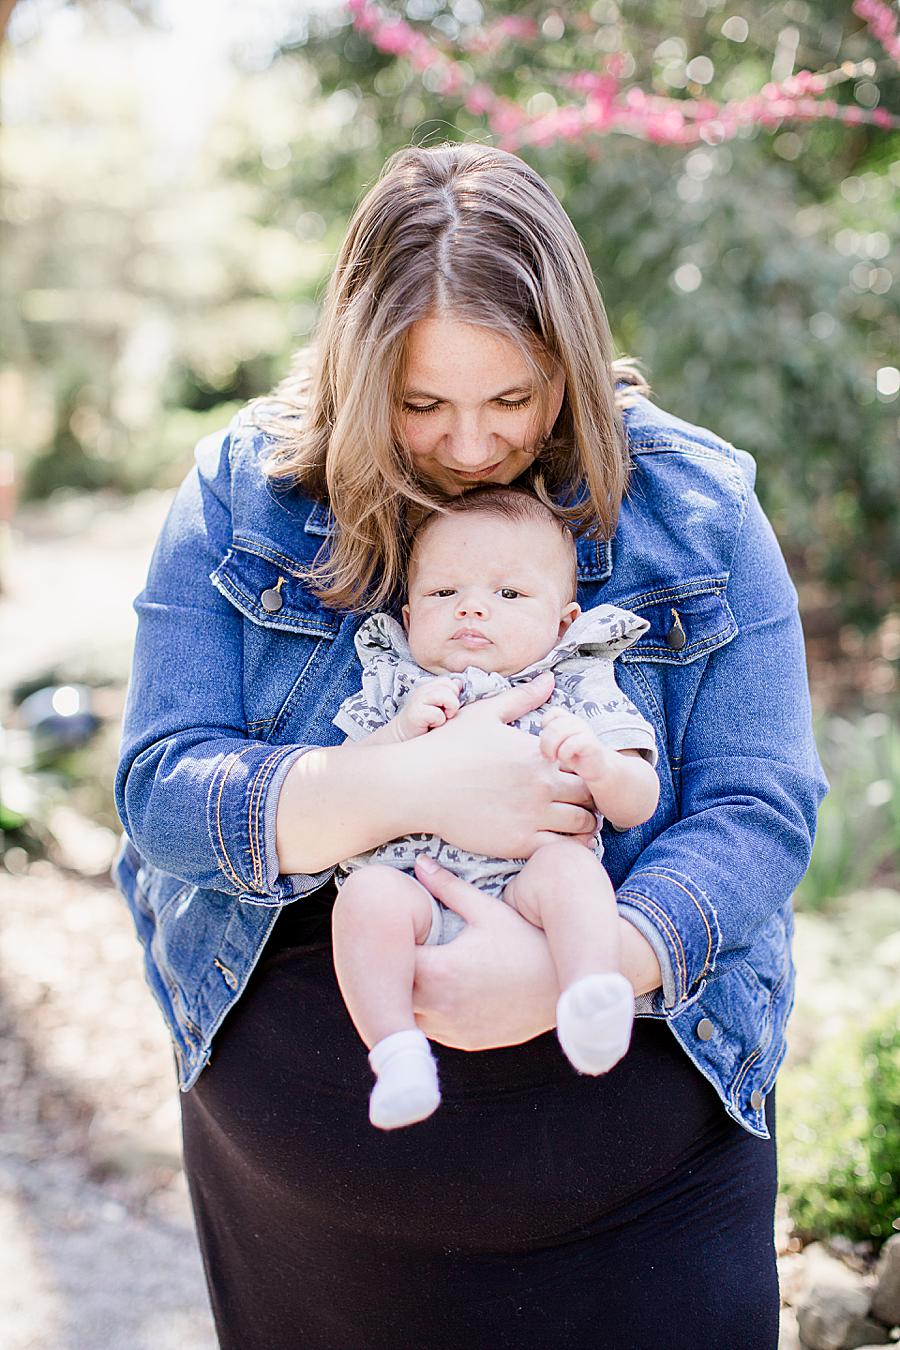 Jean jacket at this Hope Resource Session by Knoxville Wedding Photographer, Amanda May Photos.